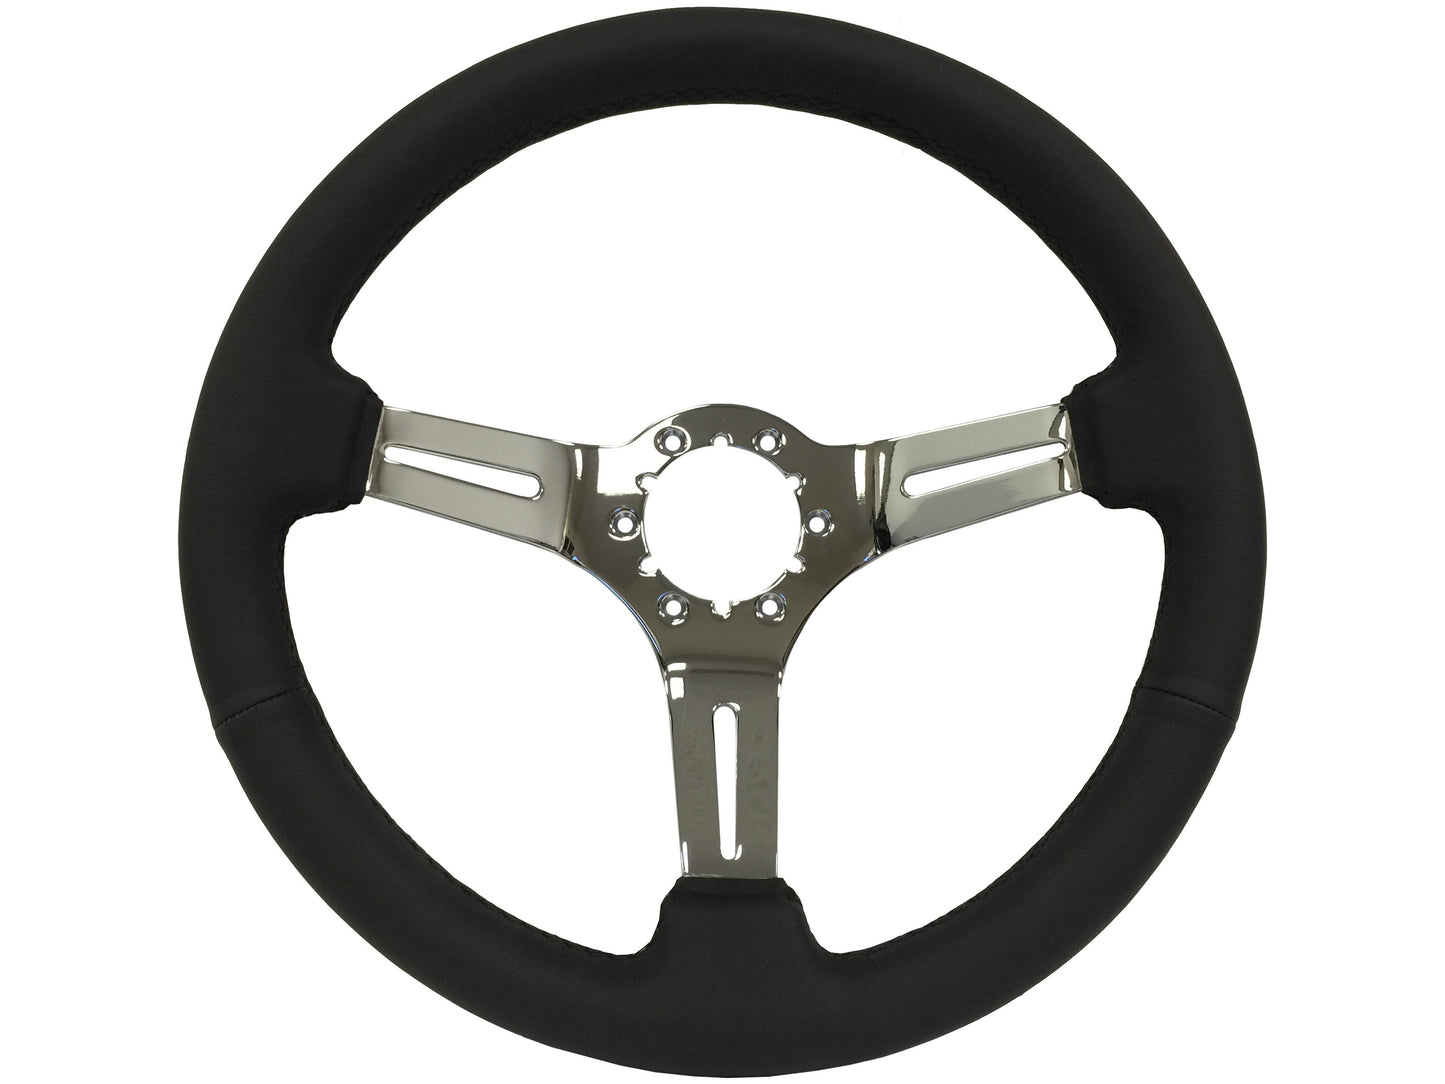 1963-64 Ford Falcon Steering Wheel Kit | Black Leather | ST3012BLK